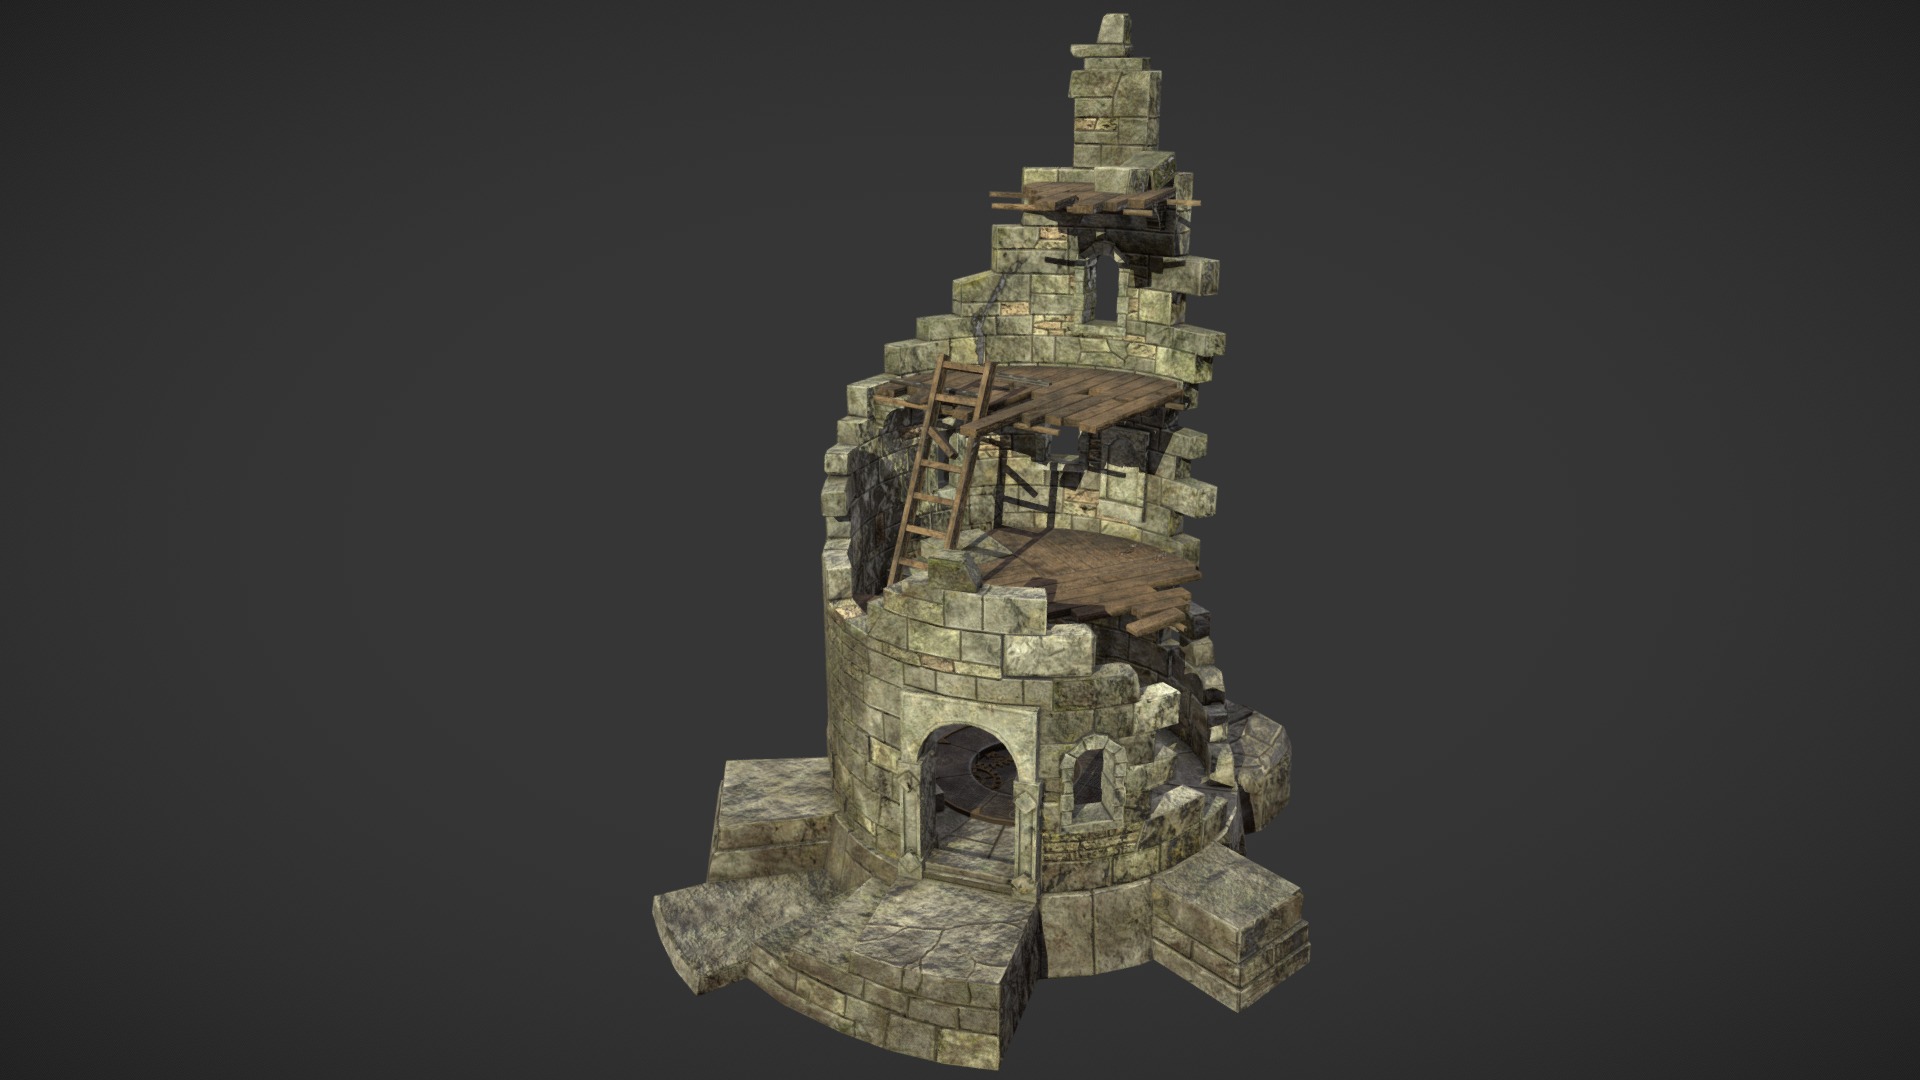 This tower has long since been abandoned by its former occupants and lies in ruin. I used the Warhammer 40k models Witchfate Tor and Dreadstone Blight as my main references for the design of the tower. I started this model in Maya, blocking in all the shapes. Then I moved to ZBrush and sculpted in detail. In hindsight, I wish I had made this a more modular blockout because I ran out of time sculpting each individual piece. After I had sculpted enough to finish baking my Game Res mesh I moved to texturing in Substance Painter. It took a bit of time to get my UV's laid out well enough to have the resolution I wanted, and I ended up going from 1 texture set to 2 in order to achieve the level of detail I wanted. I've learned a lot from this project and I look forward to applying what I have learned in future projects 3d model